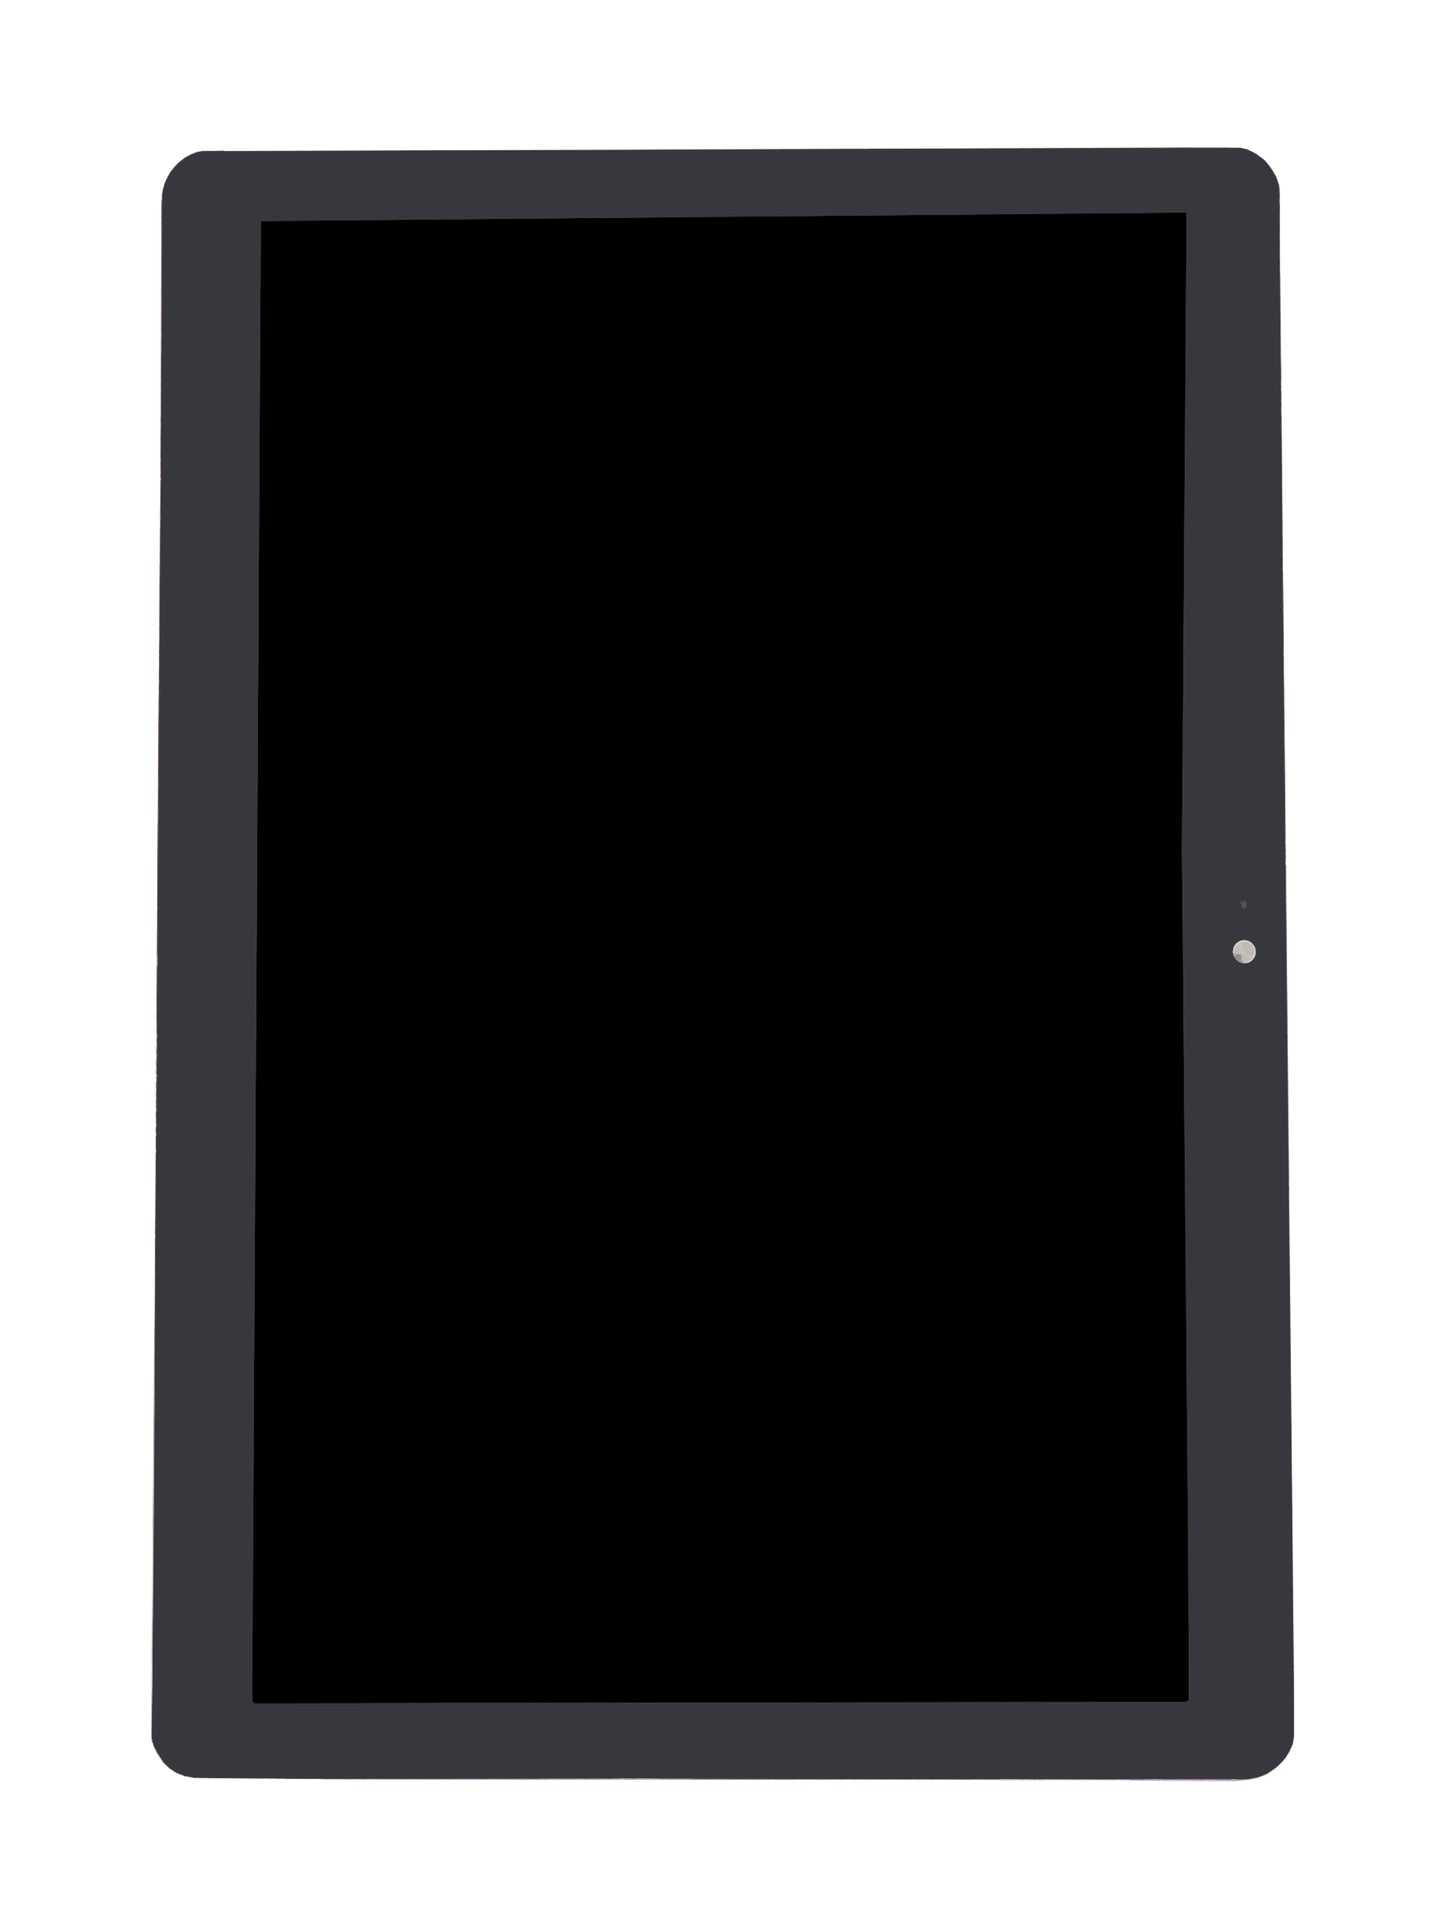 HW MediaPad T3 10" 2017 Screen Assembly (With The Frame) (Refurbished) (Black)